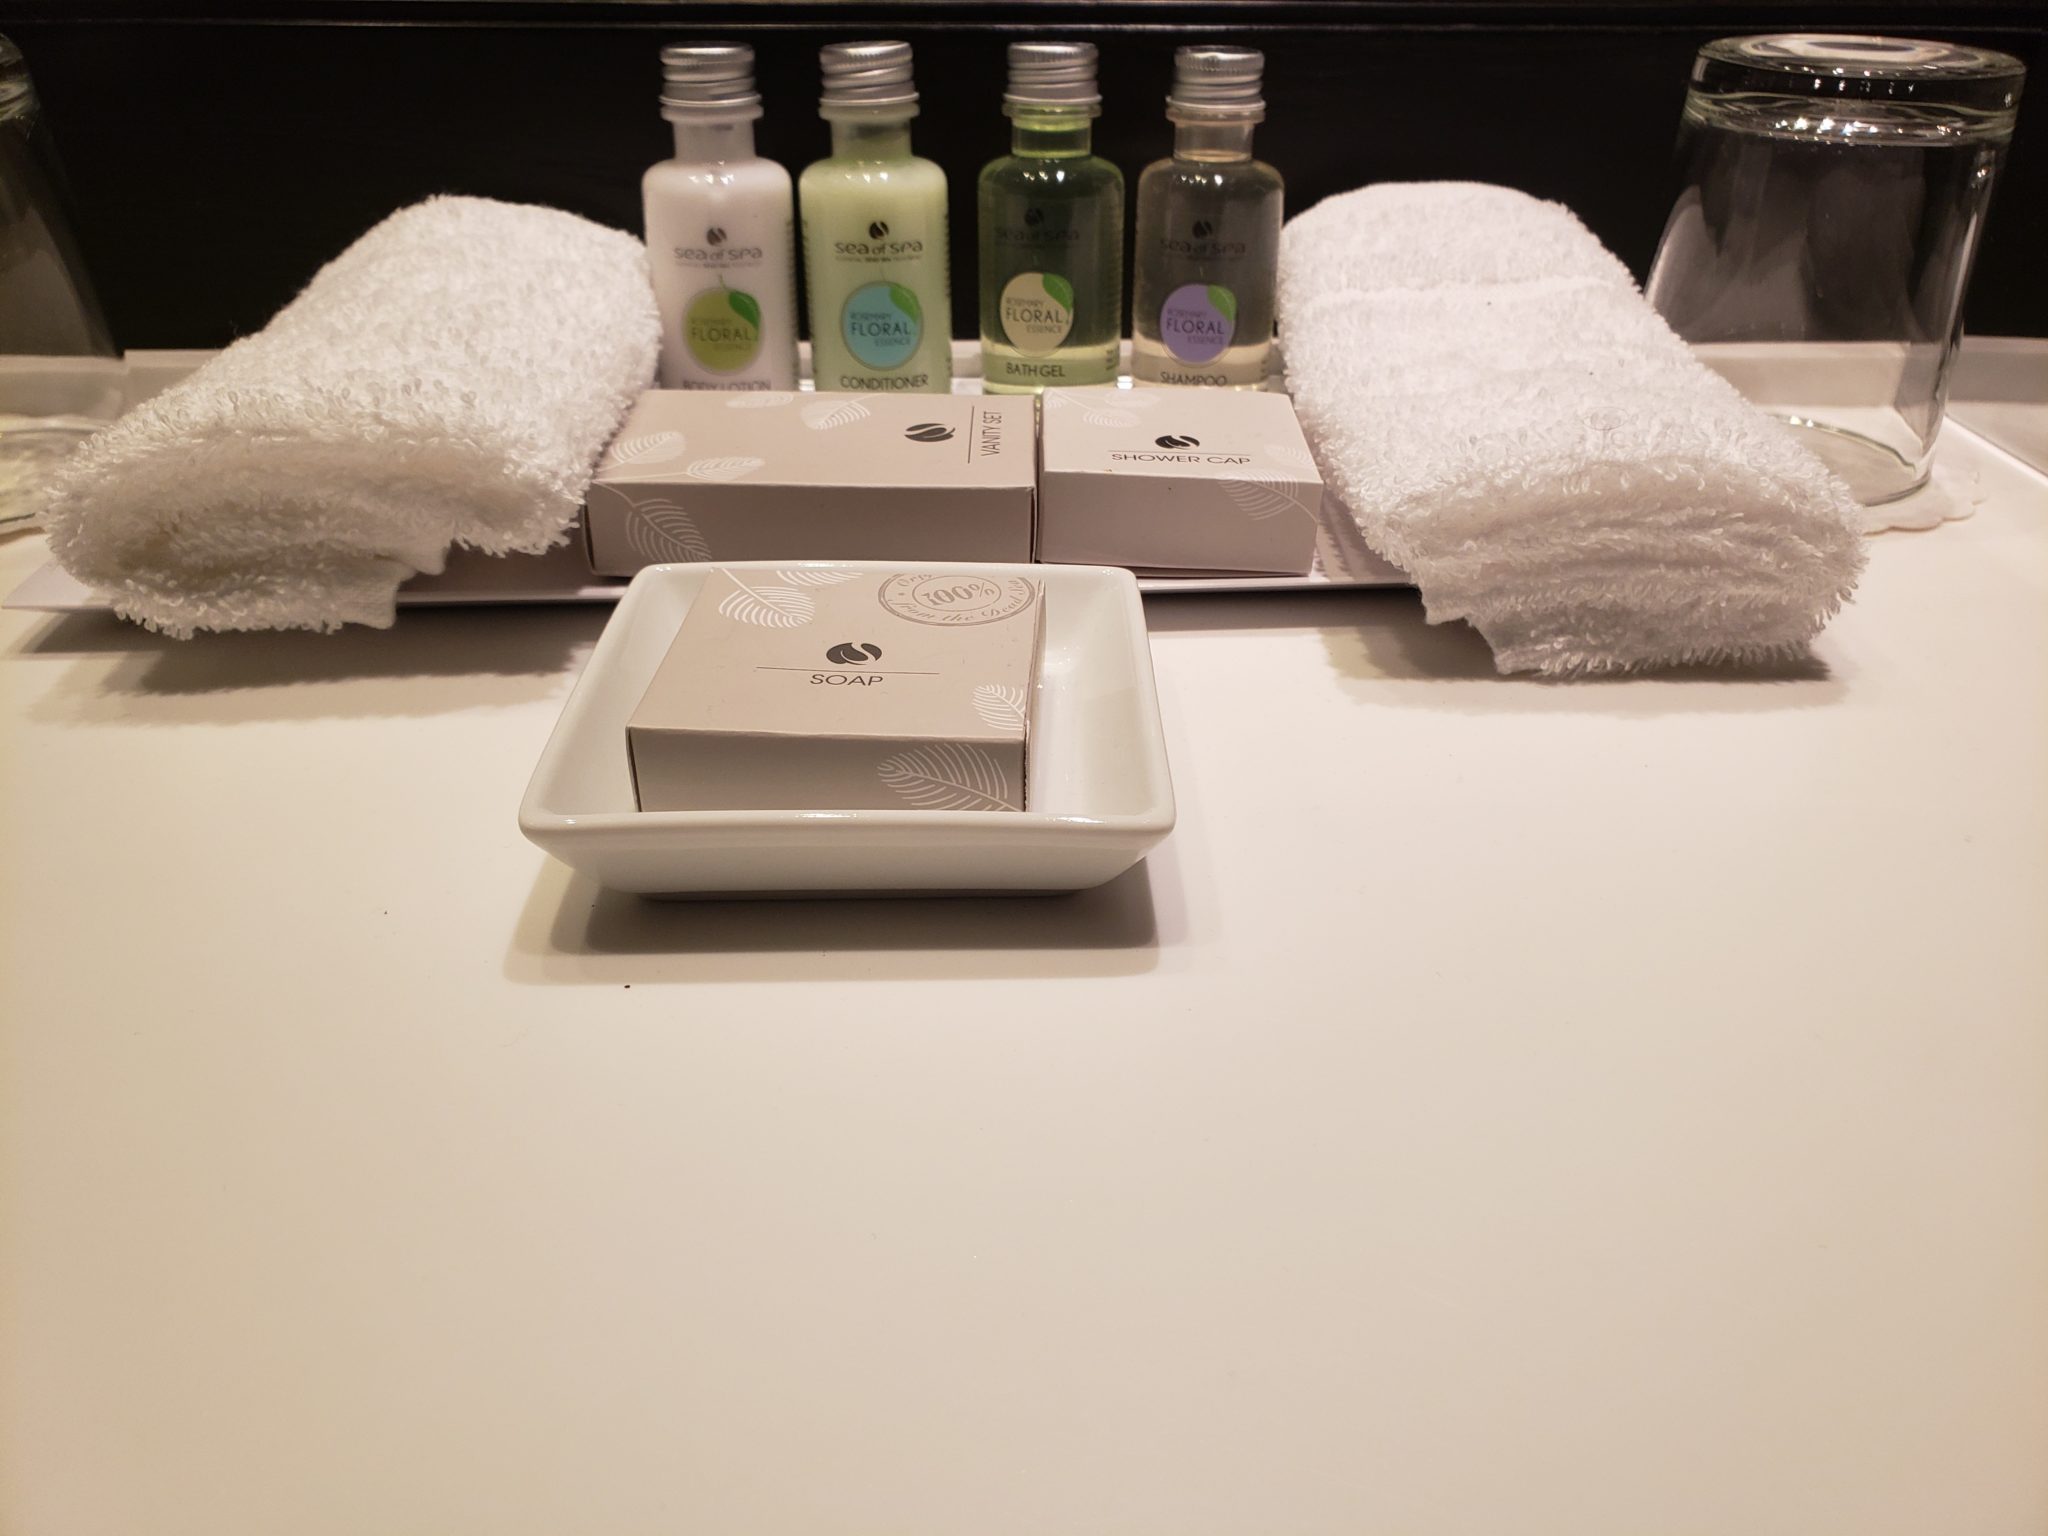 a group of small bottles of soap and towels on a white surface